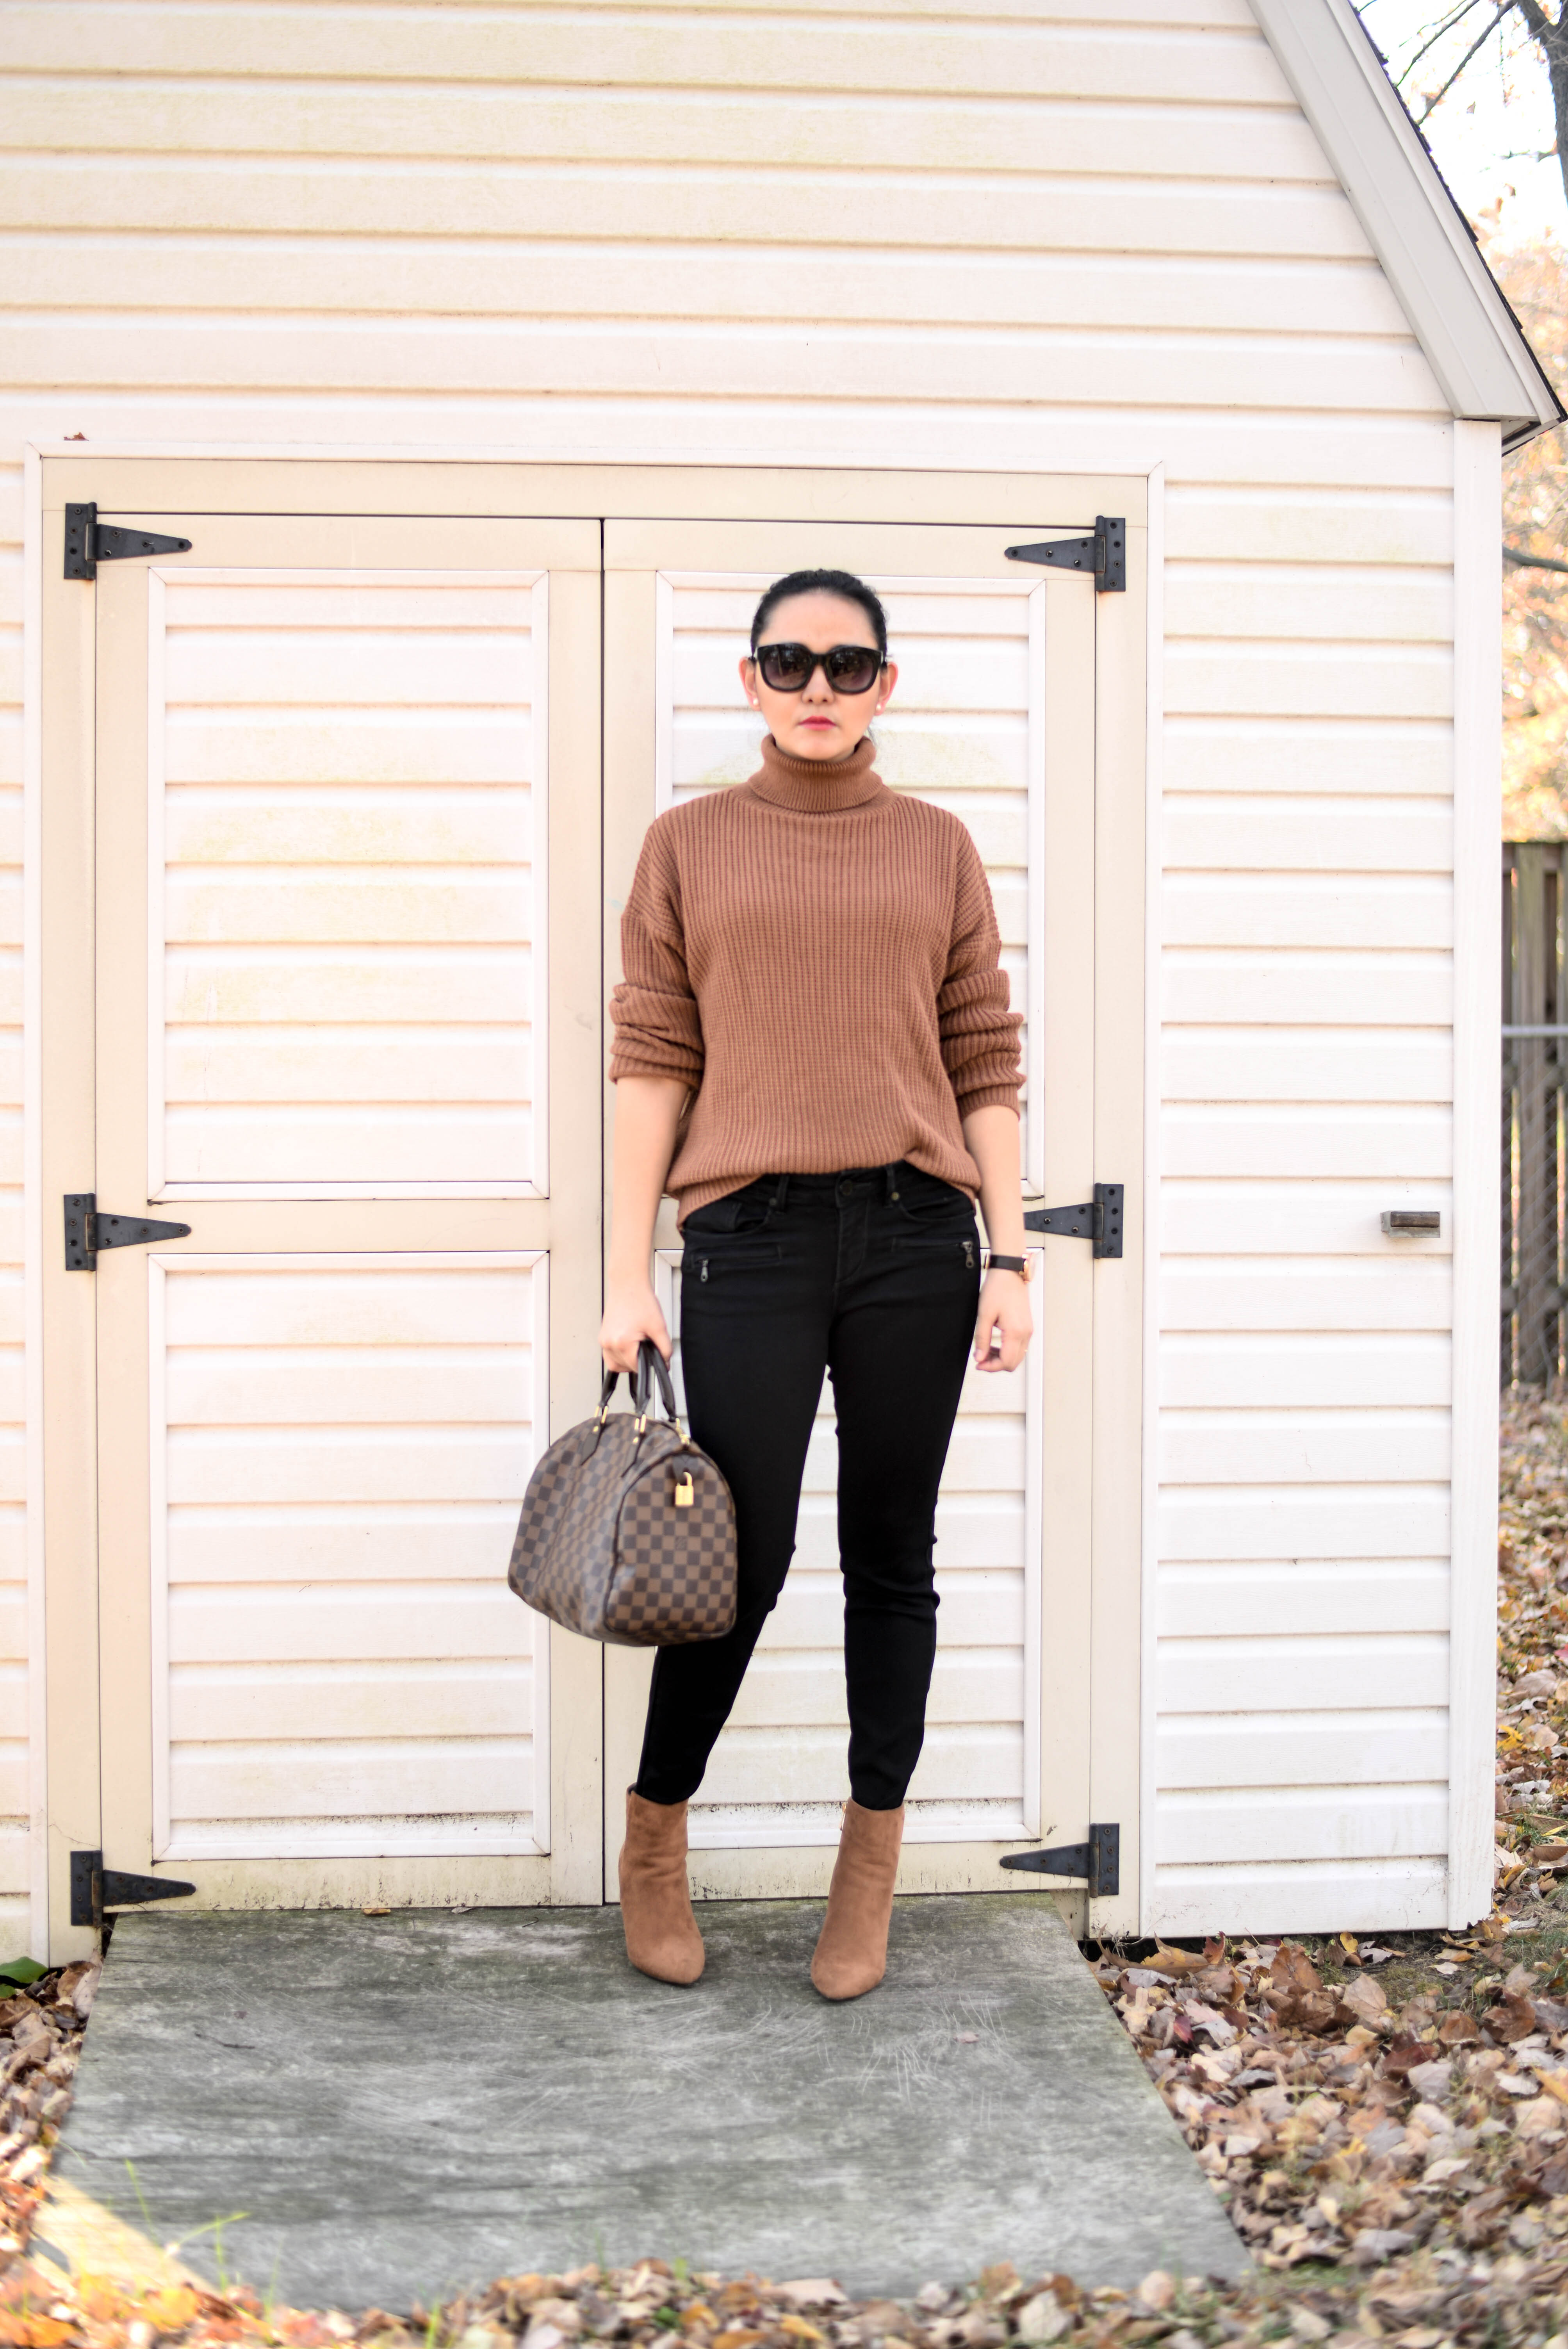 How To Wear An Oversized Turtleneck Sweater